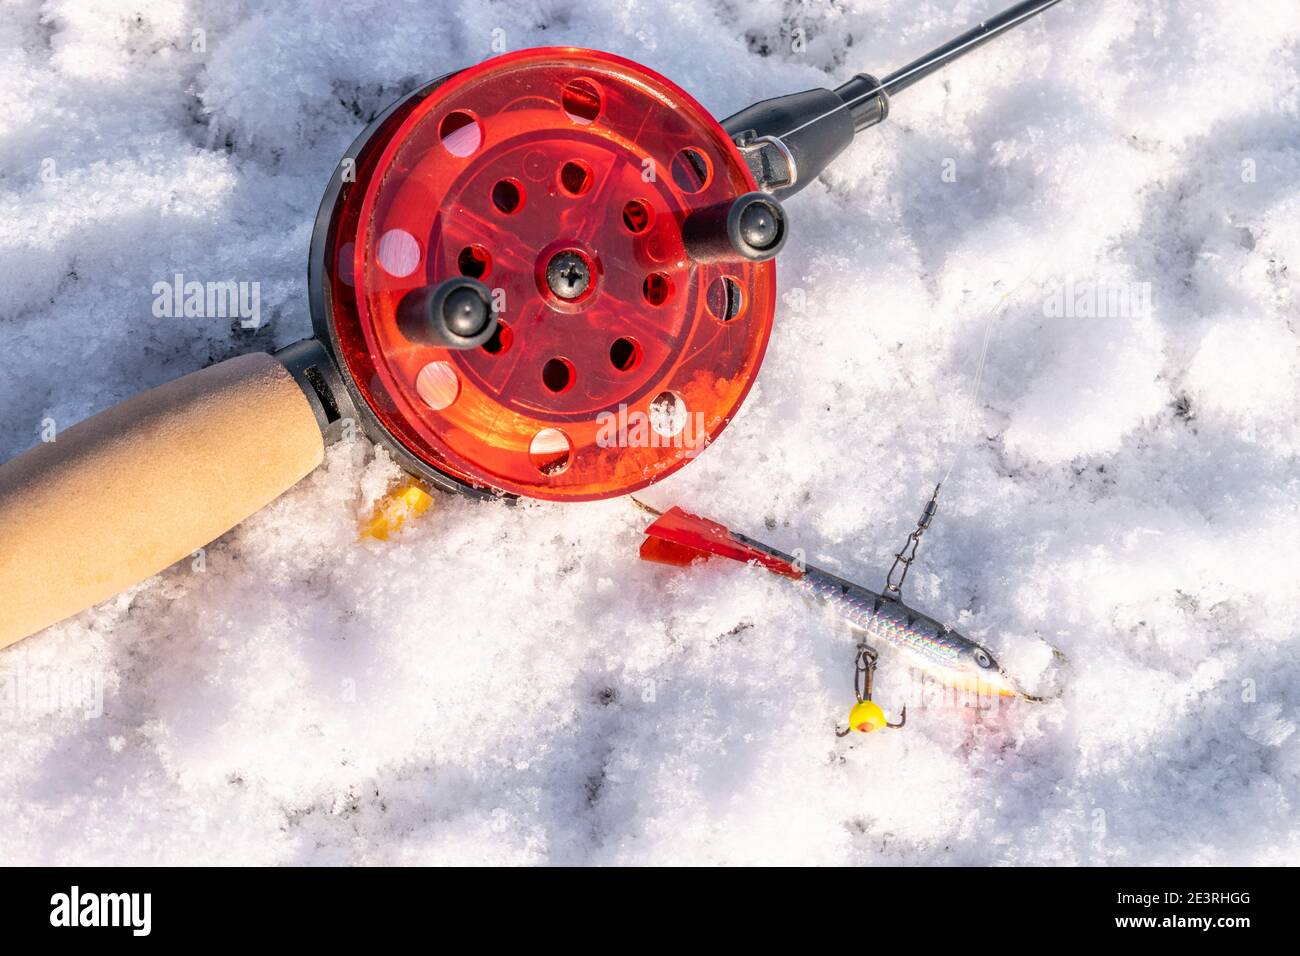 Winter fishing rod with a lure on ice closeup 7 Stock Photo